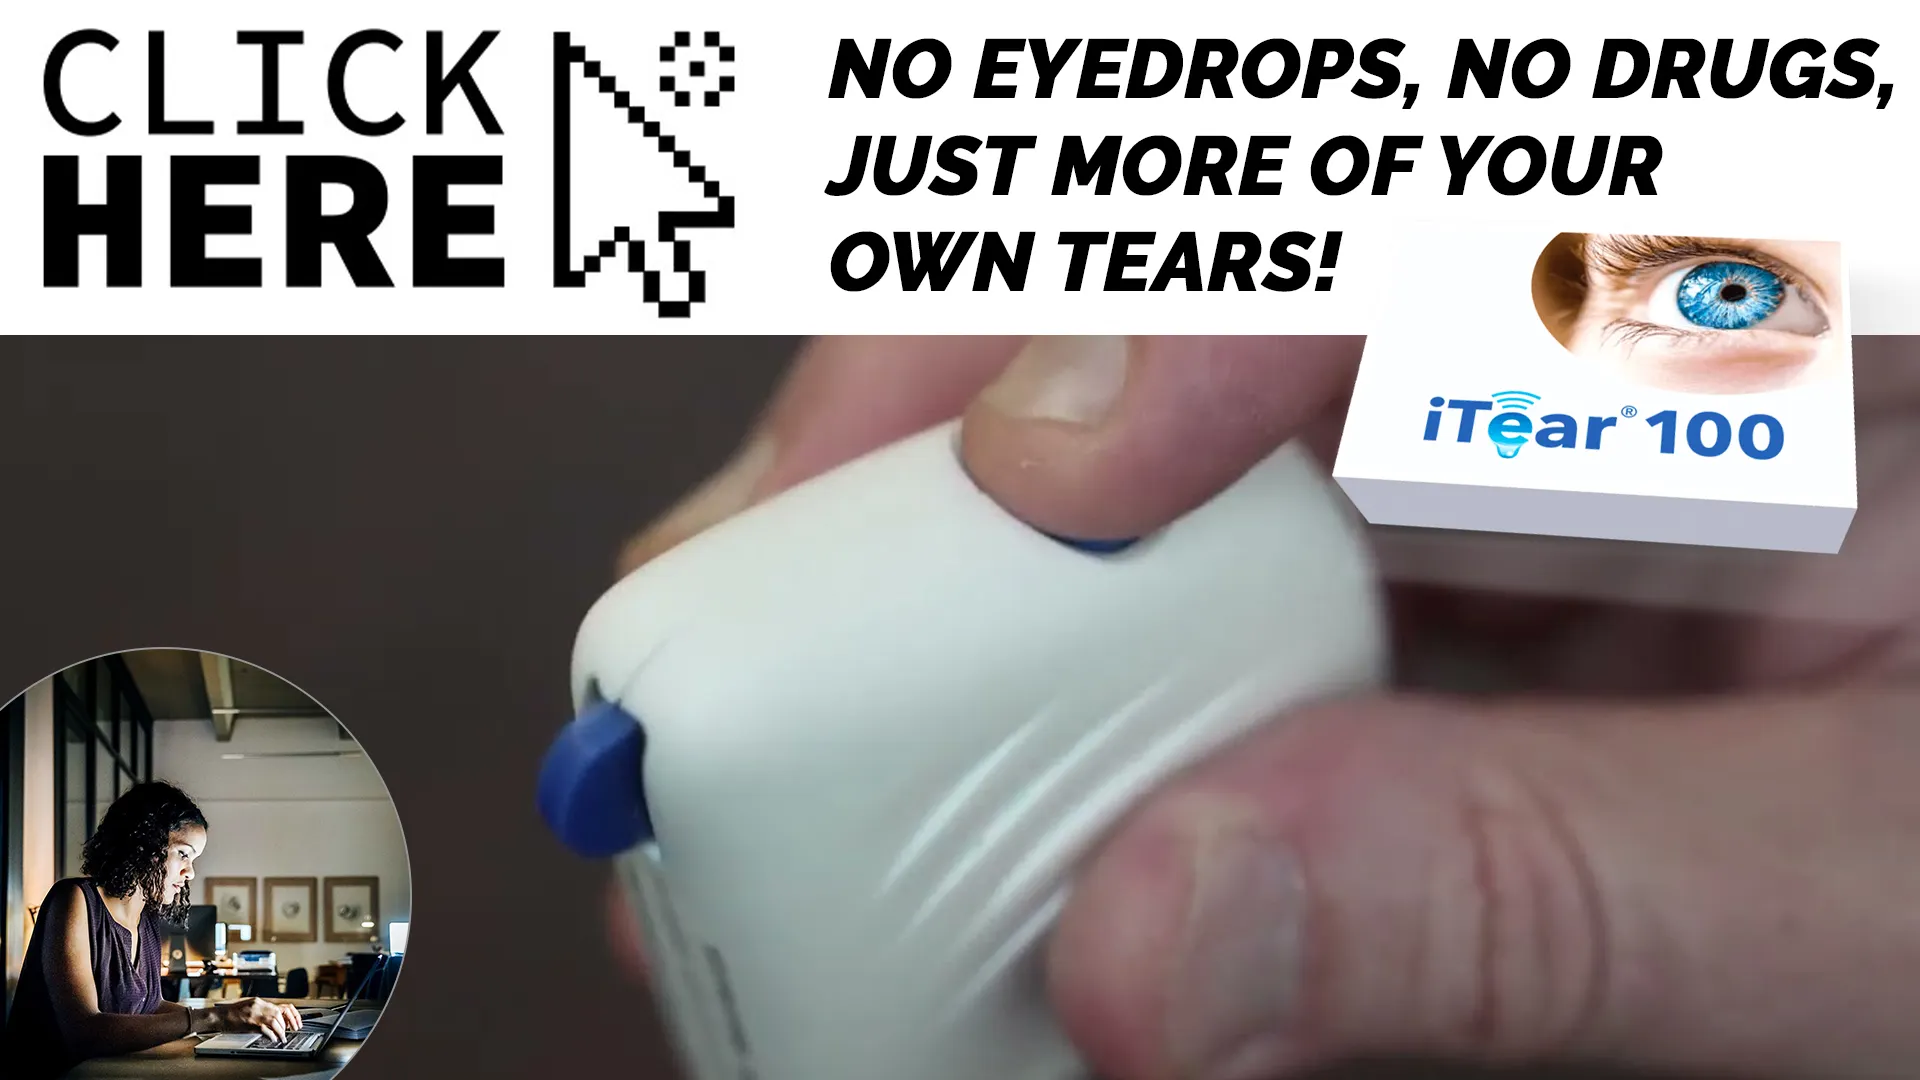 Effective Dry Eye Relief at Your Fingertips